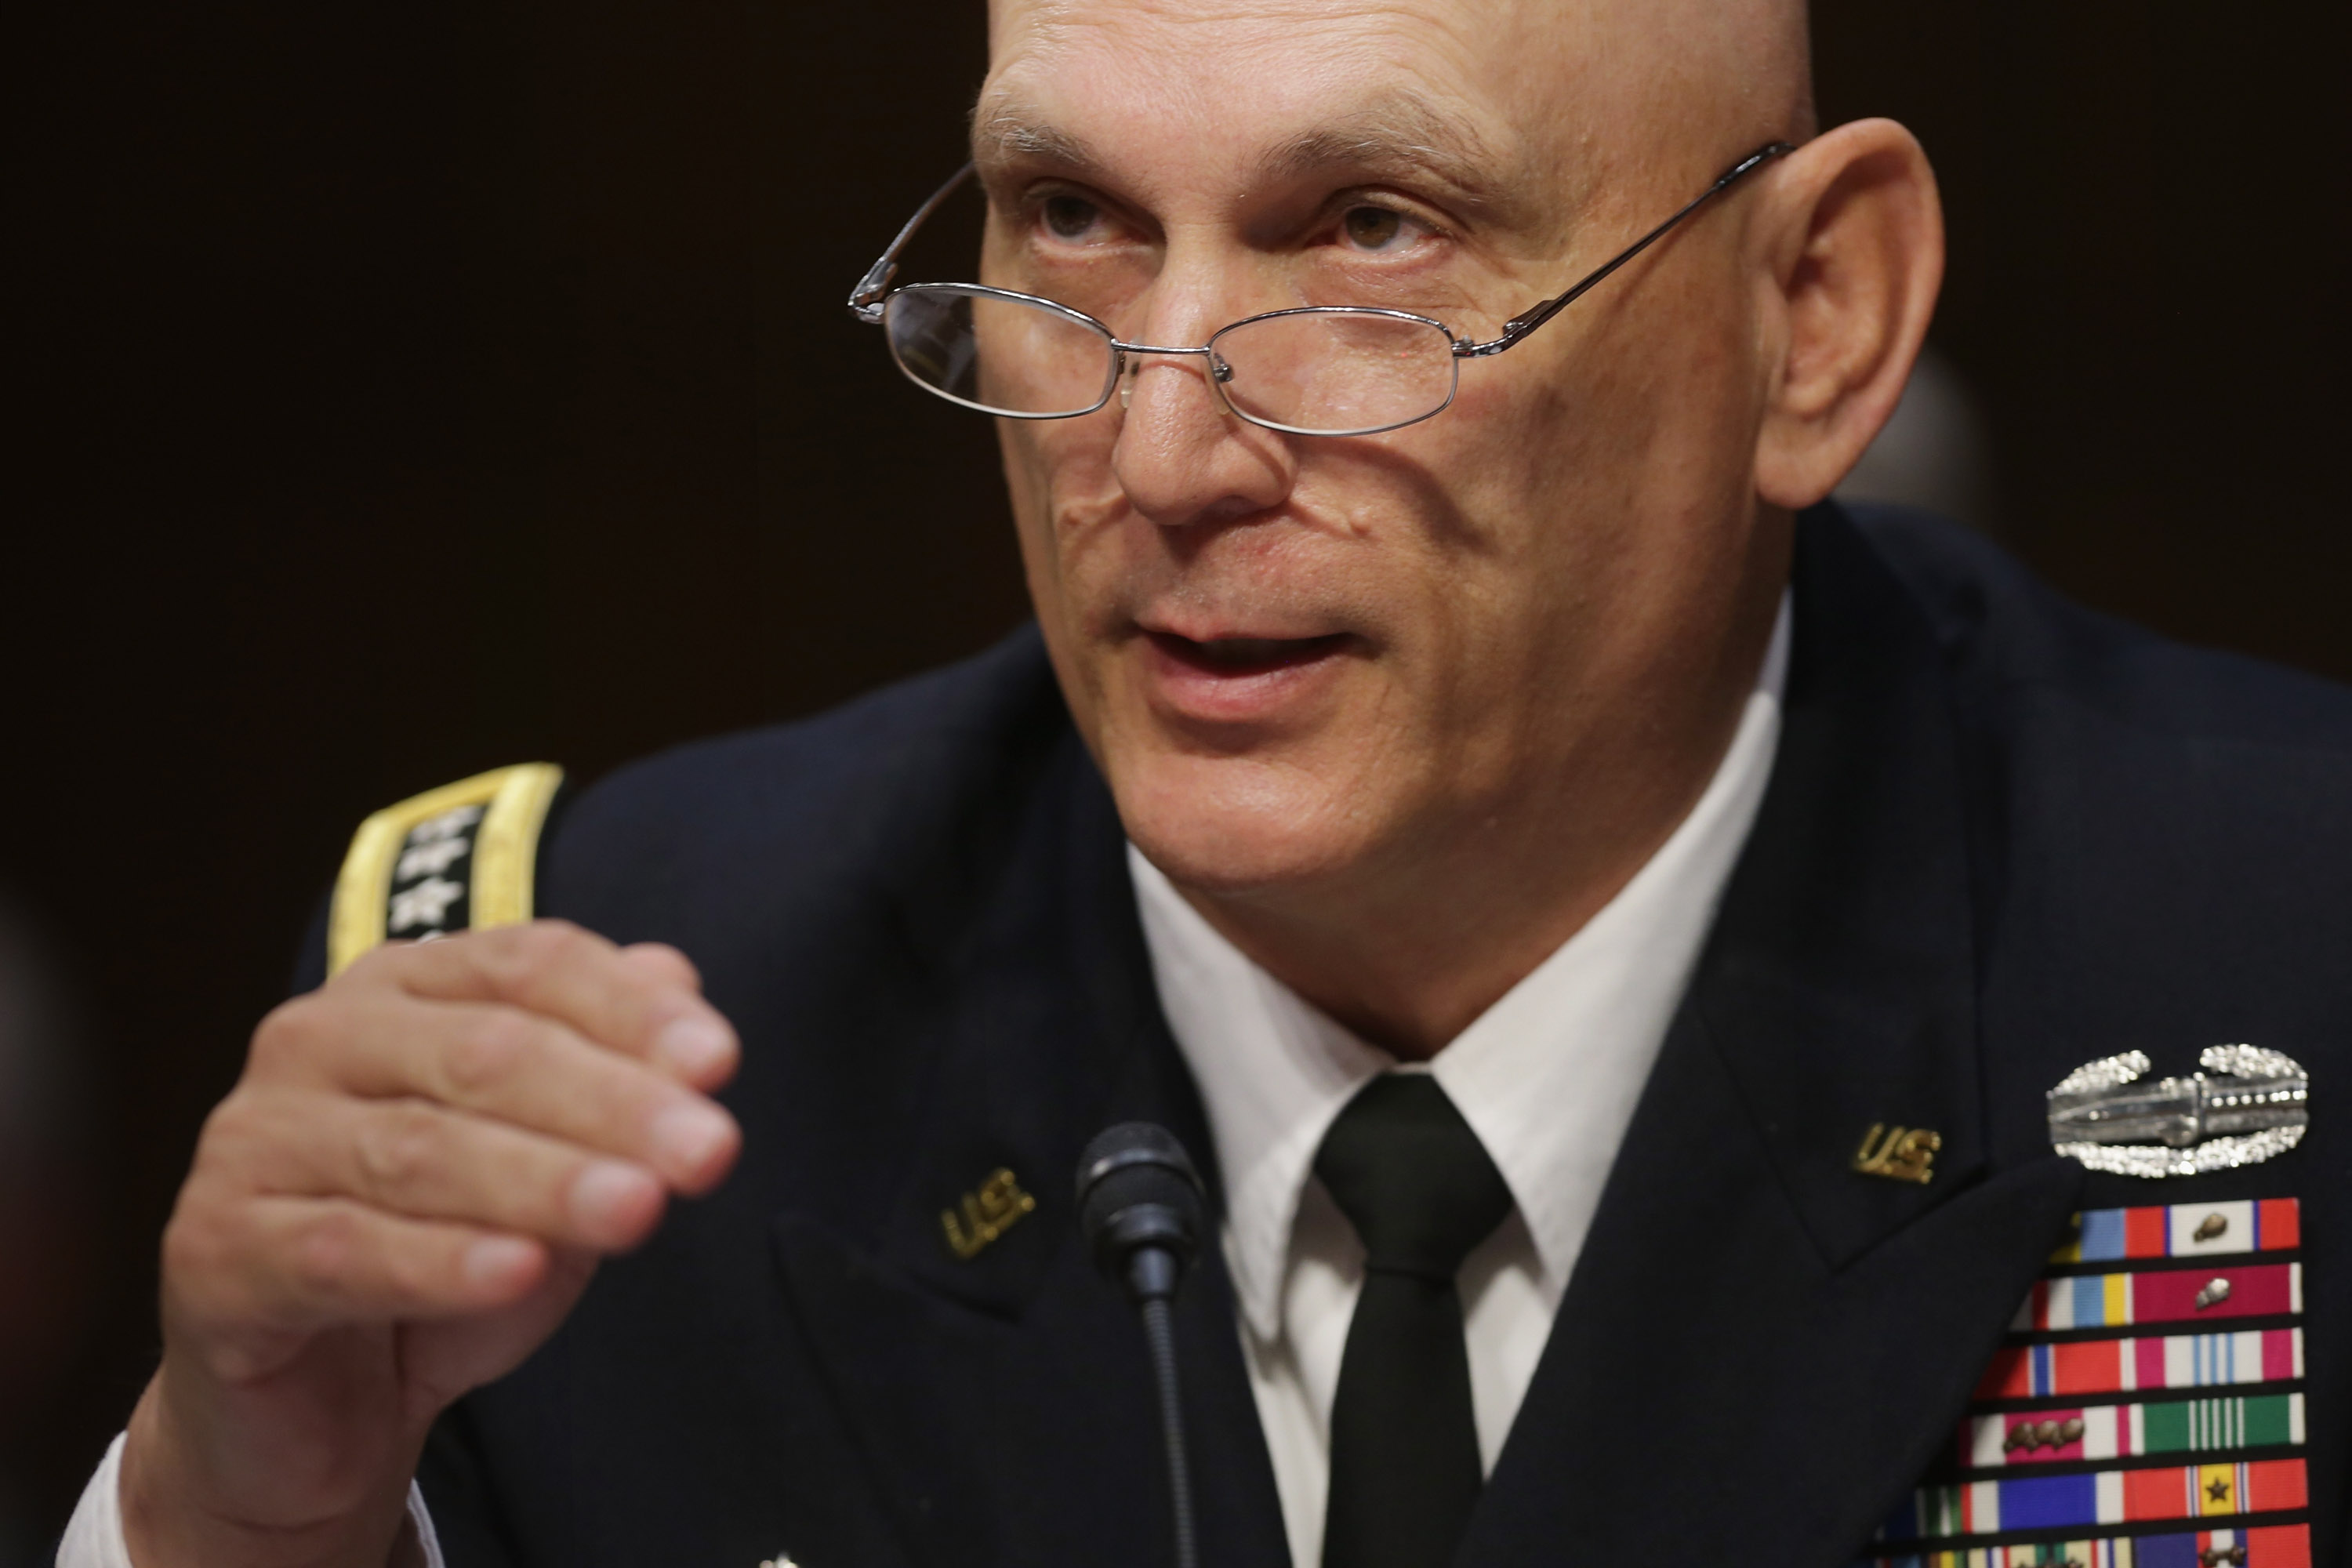 General Ray Odierno testifies before Congress in May. (Chip Somodevilla / Getty Images)